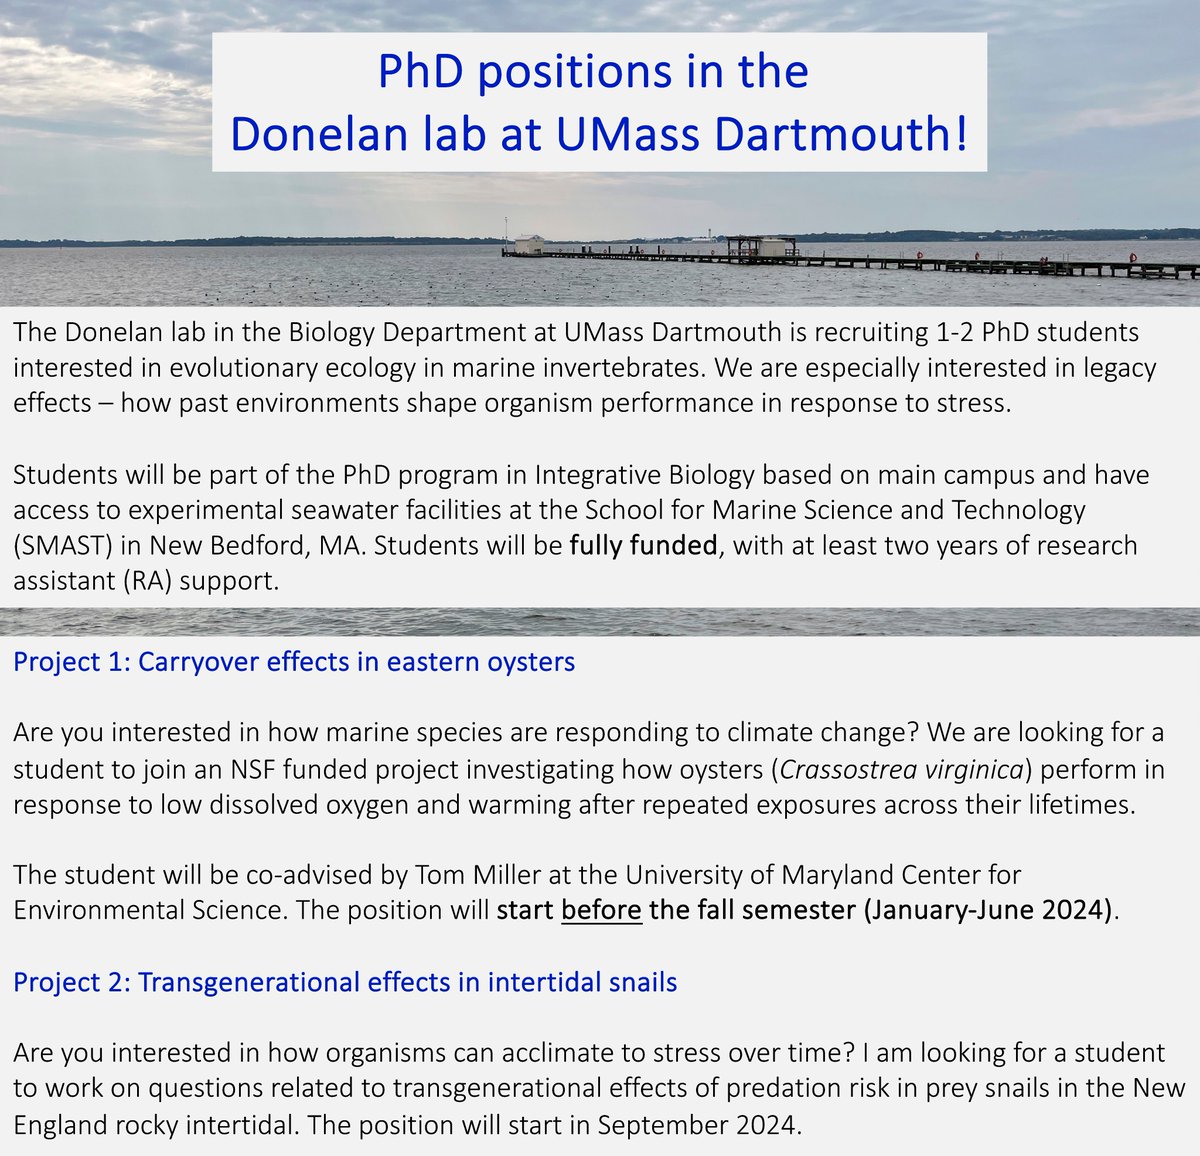 Are you interested in how marine species respond to stress over multiple generations or life stages?🦪🐌🌊 I'm looking for PhD students to join my lab @UMassD in Spring and Fall 2024!! More info here: sarahdonelanphd.weebly.com/opportunities.…